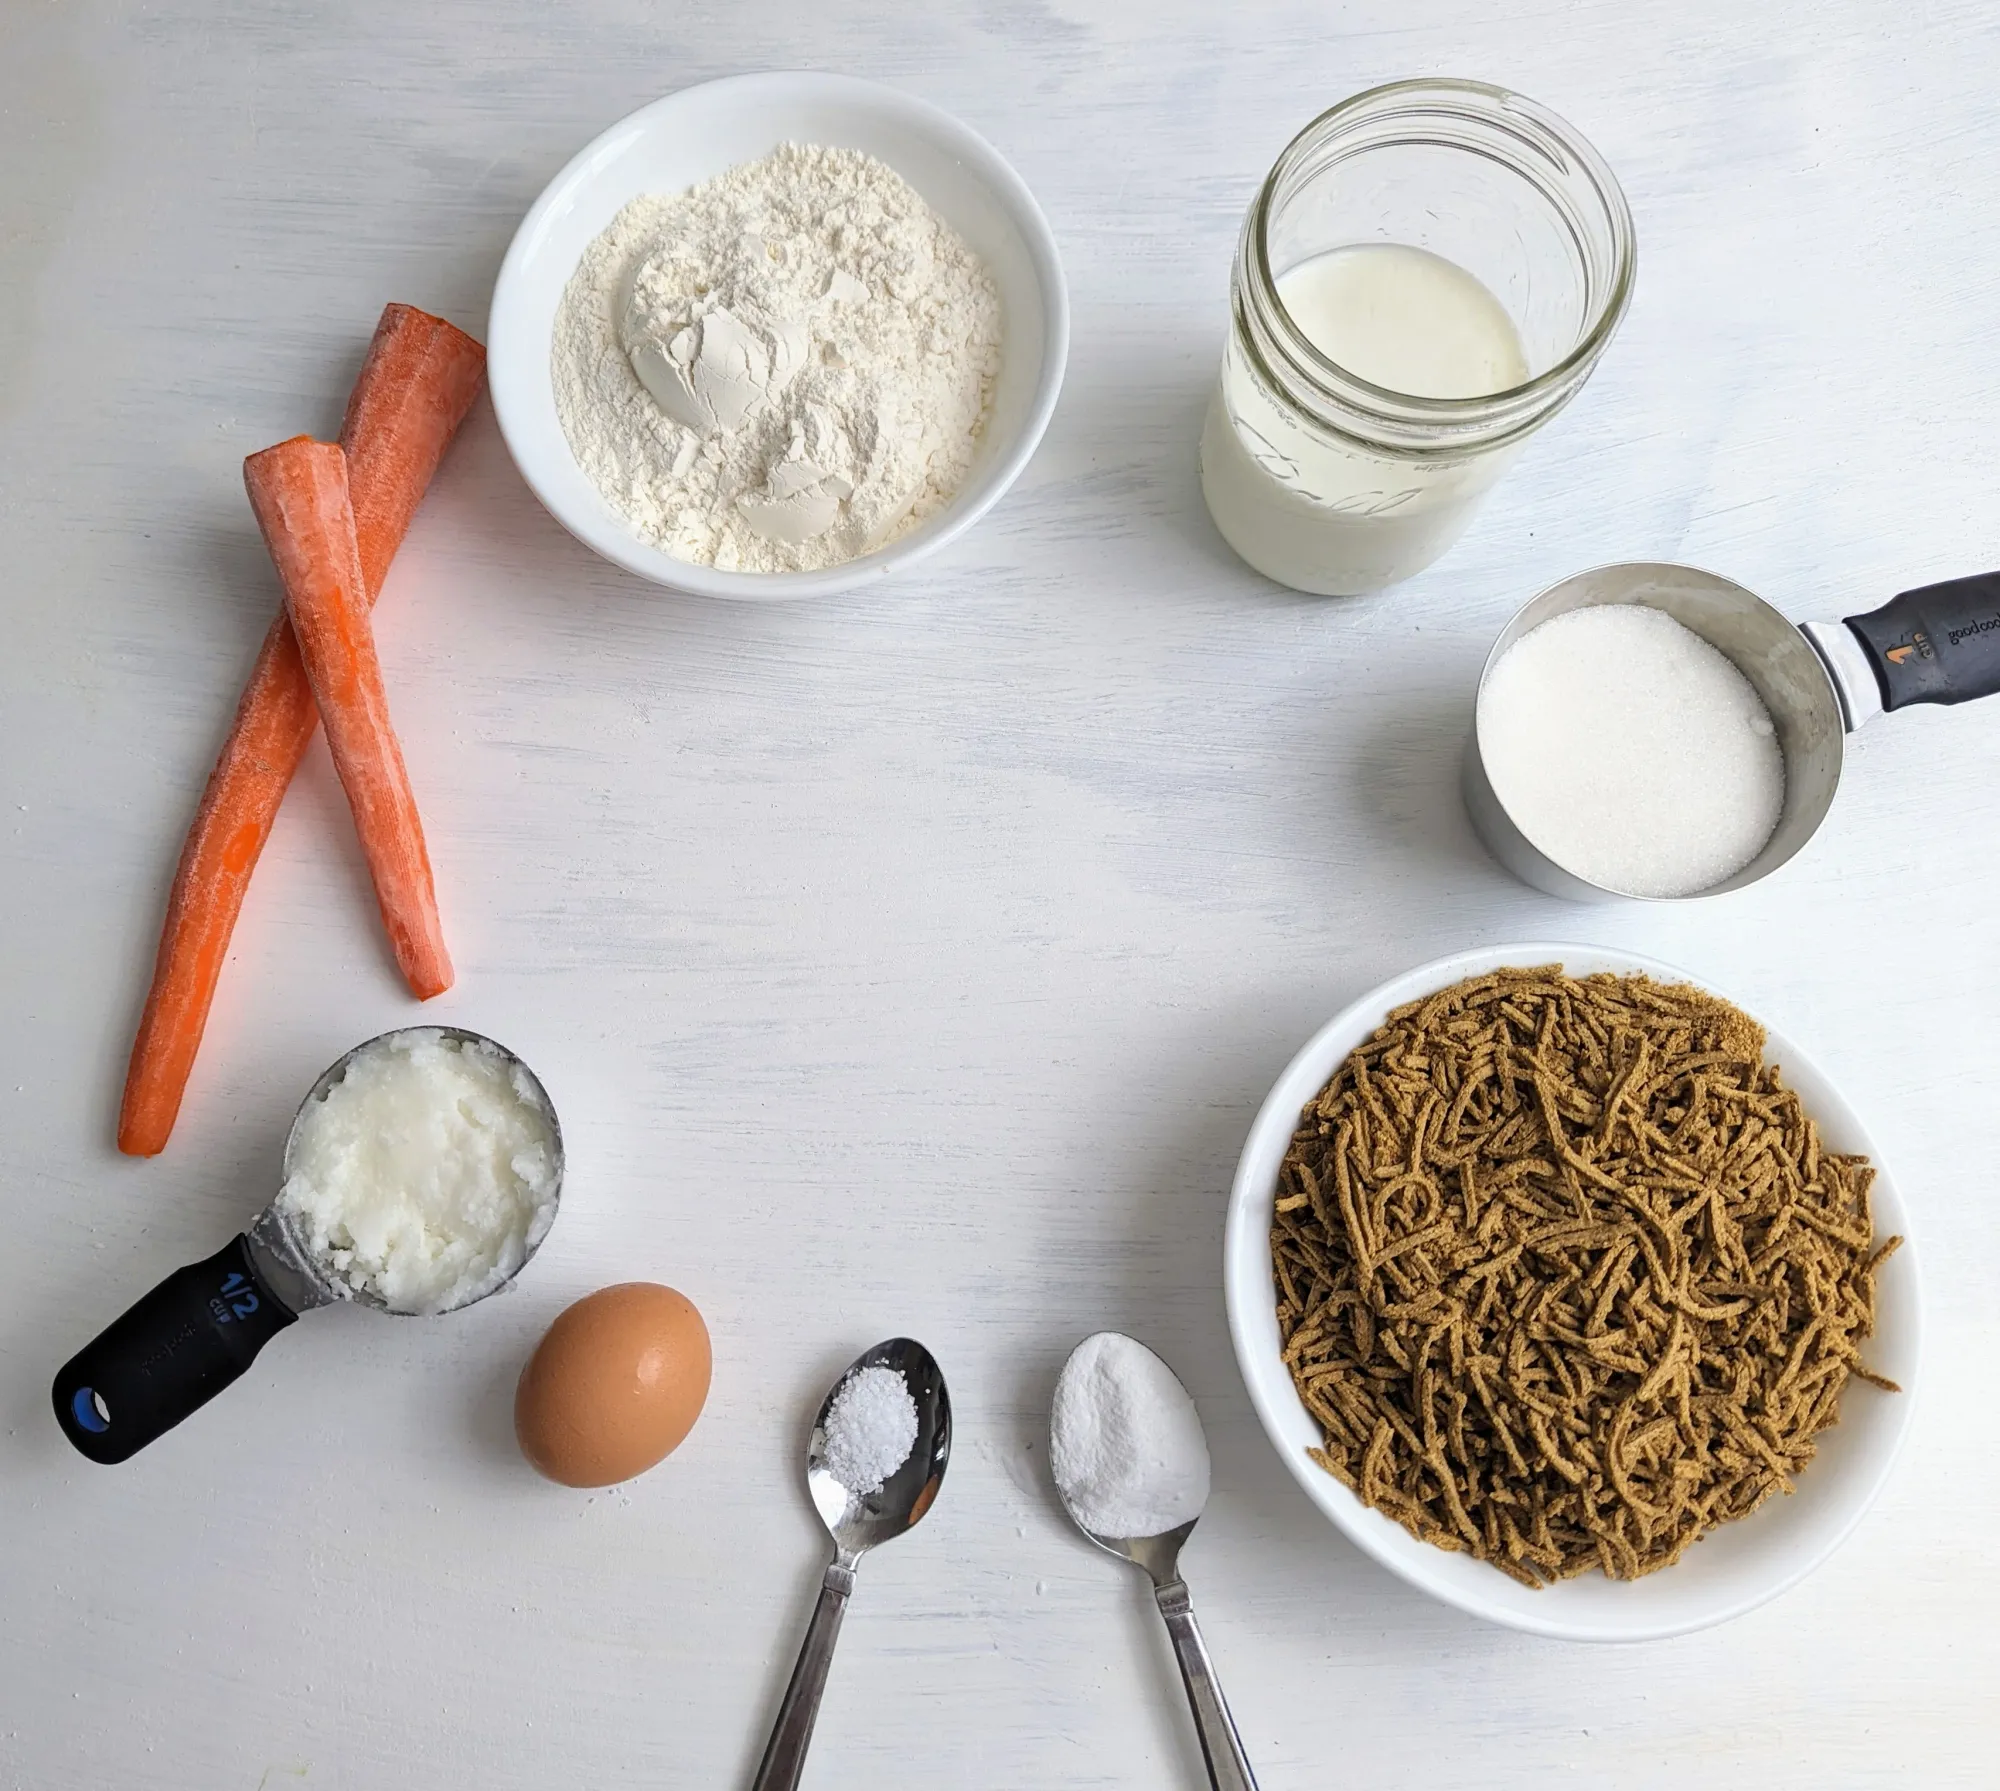 An image of all the ingredients; bran, coconut oil, eggs, buttermilk, sugar, flour, baking soda, salt and carrots